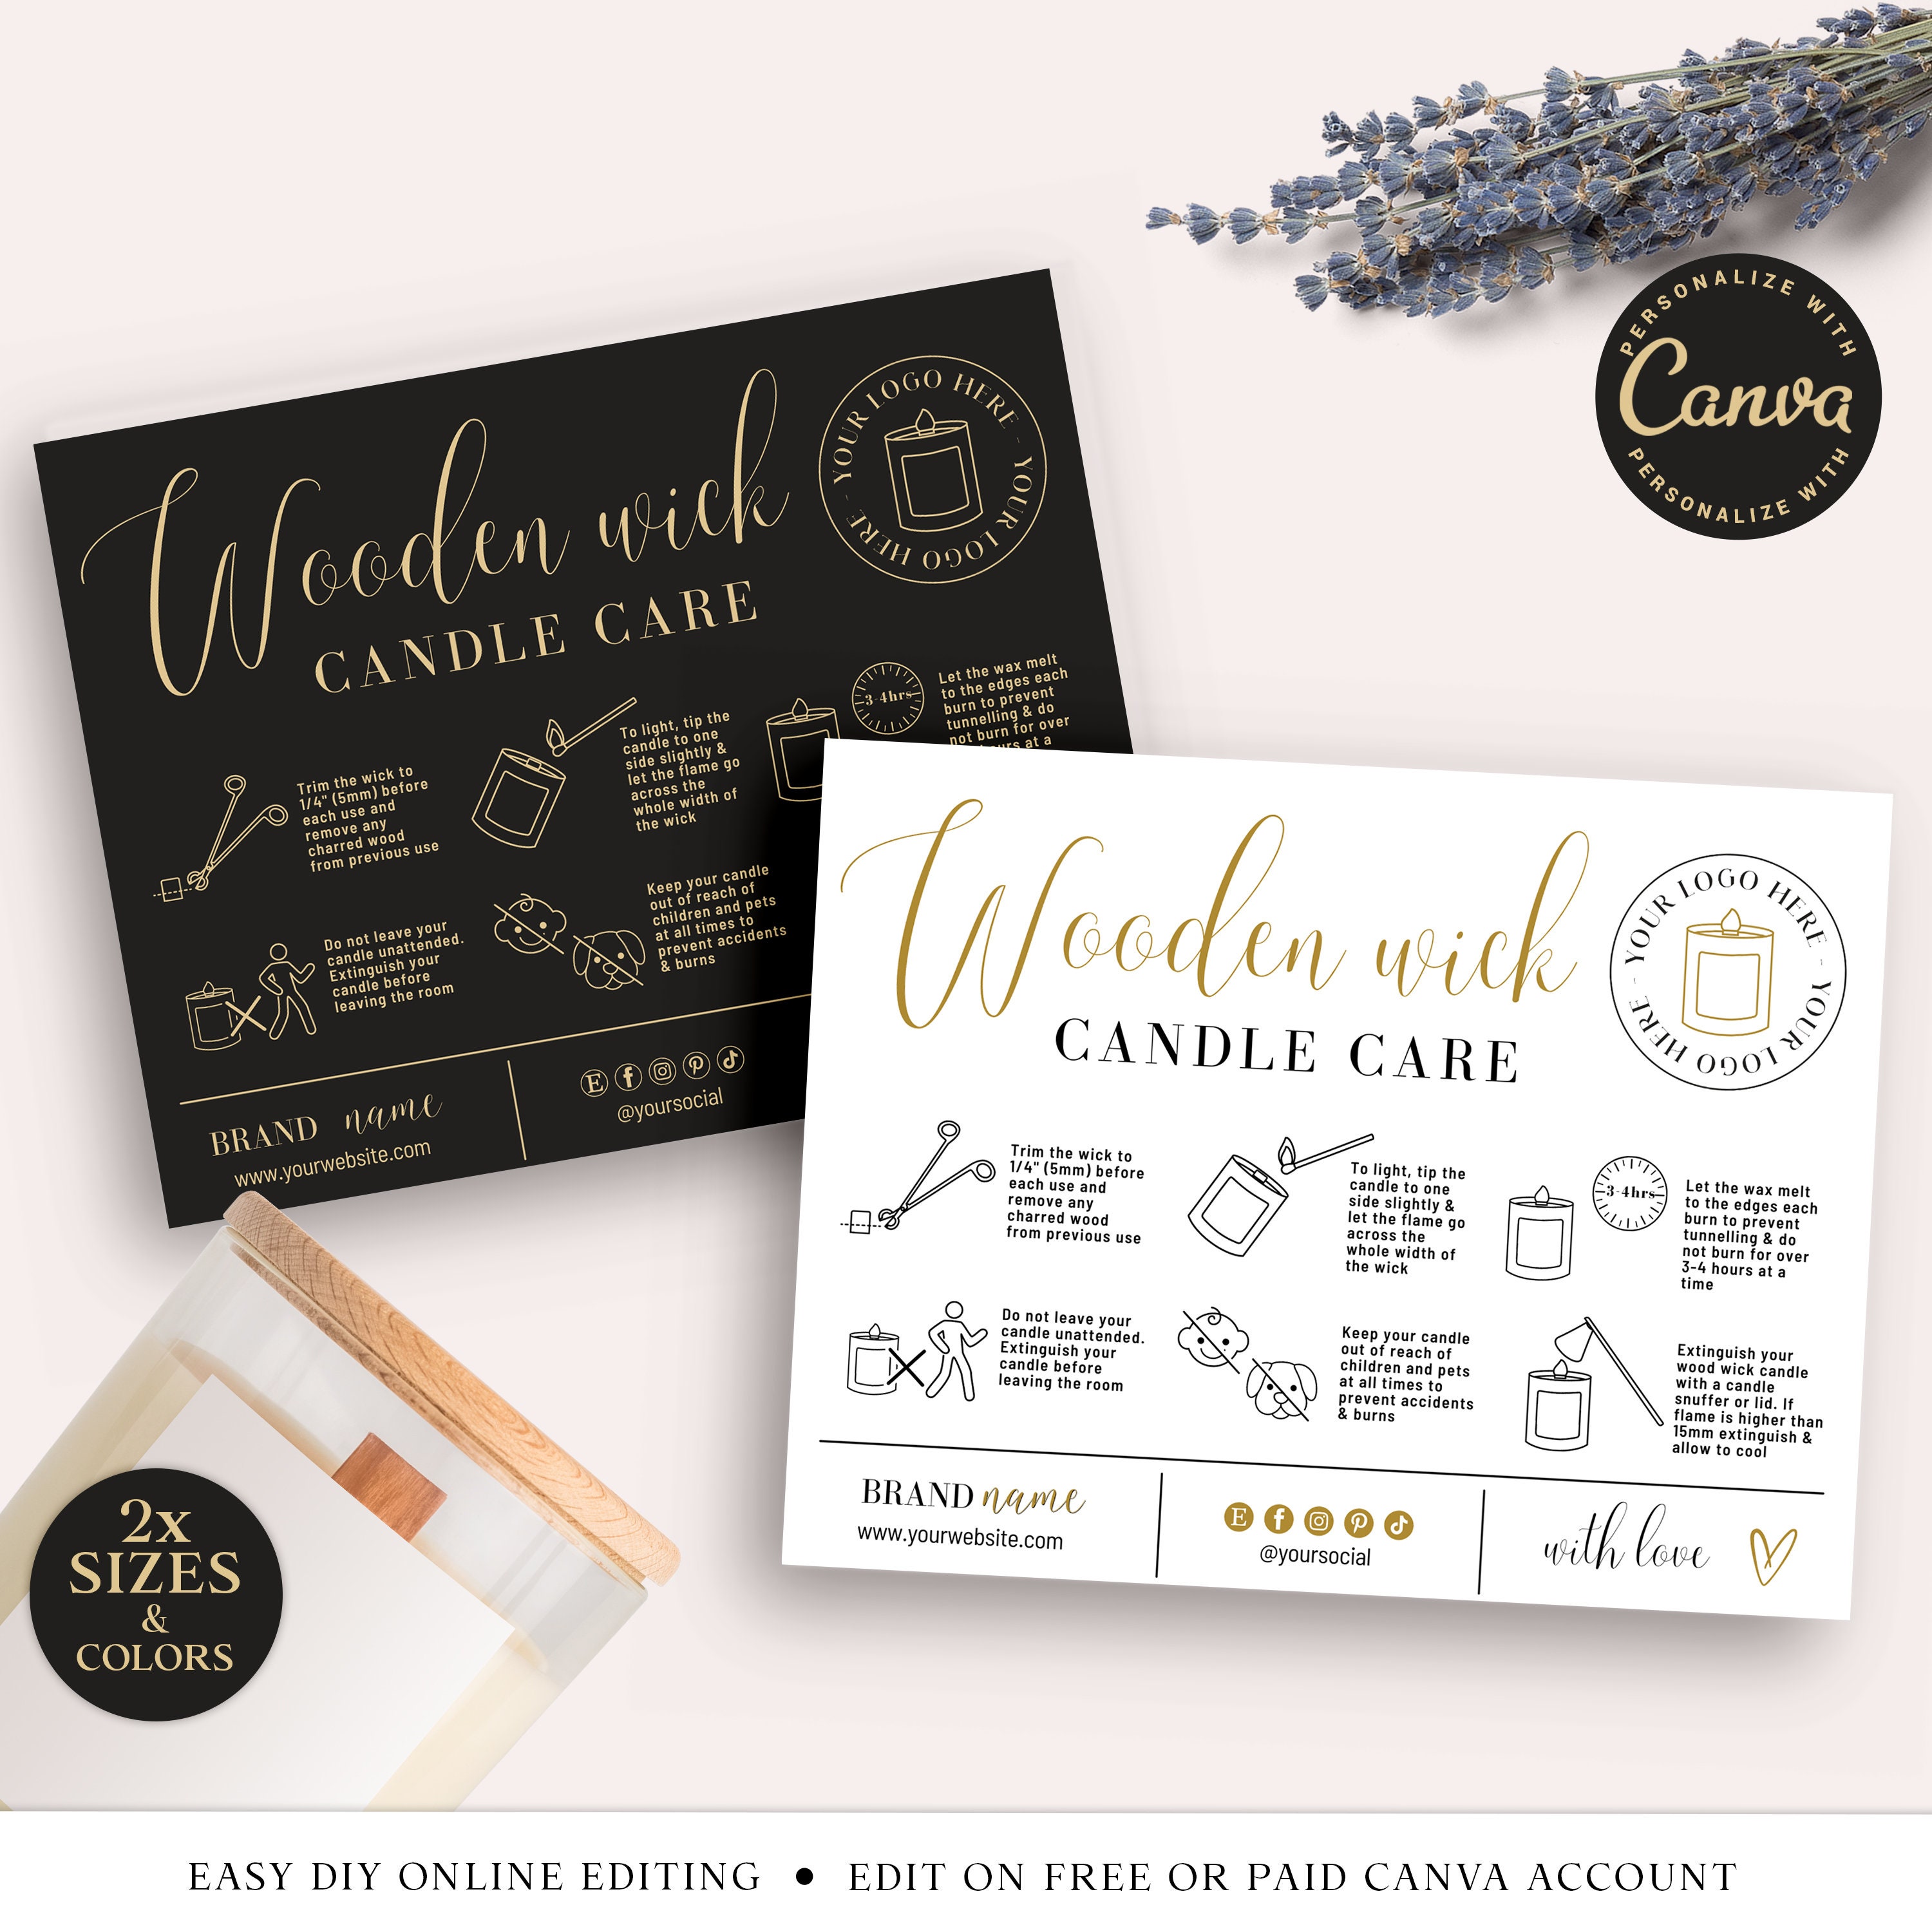 Wooden Wick Candle Safety Guide, Candle Care Card Template